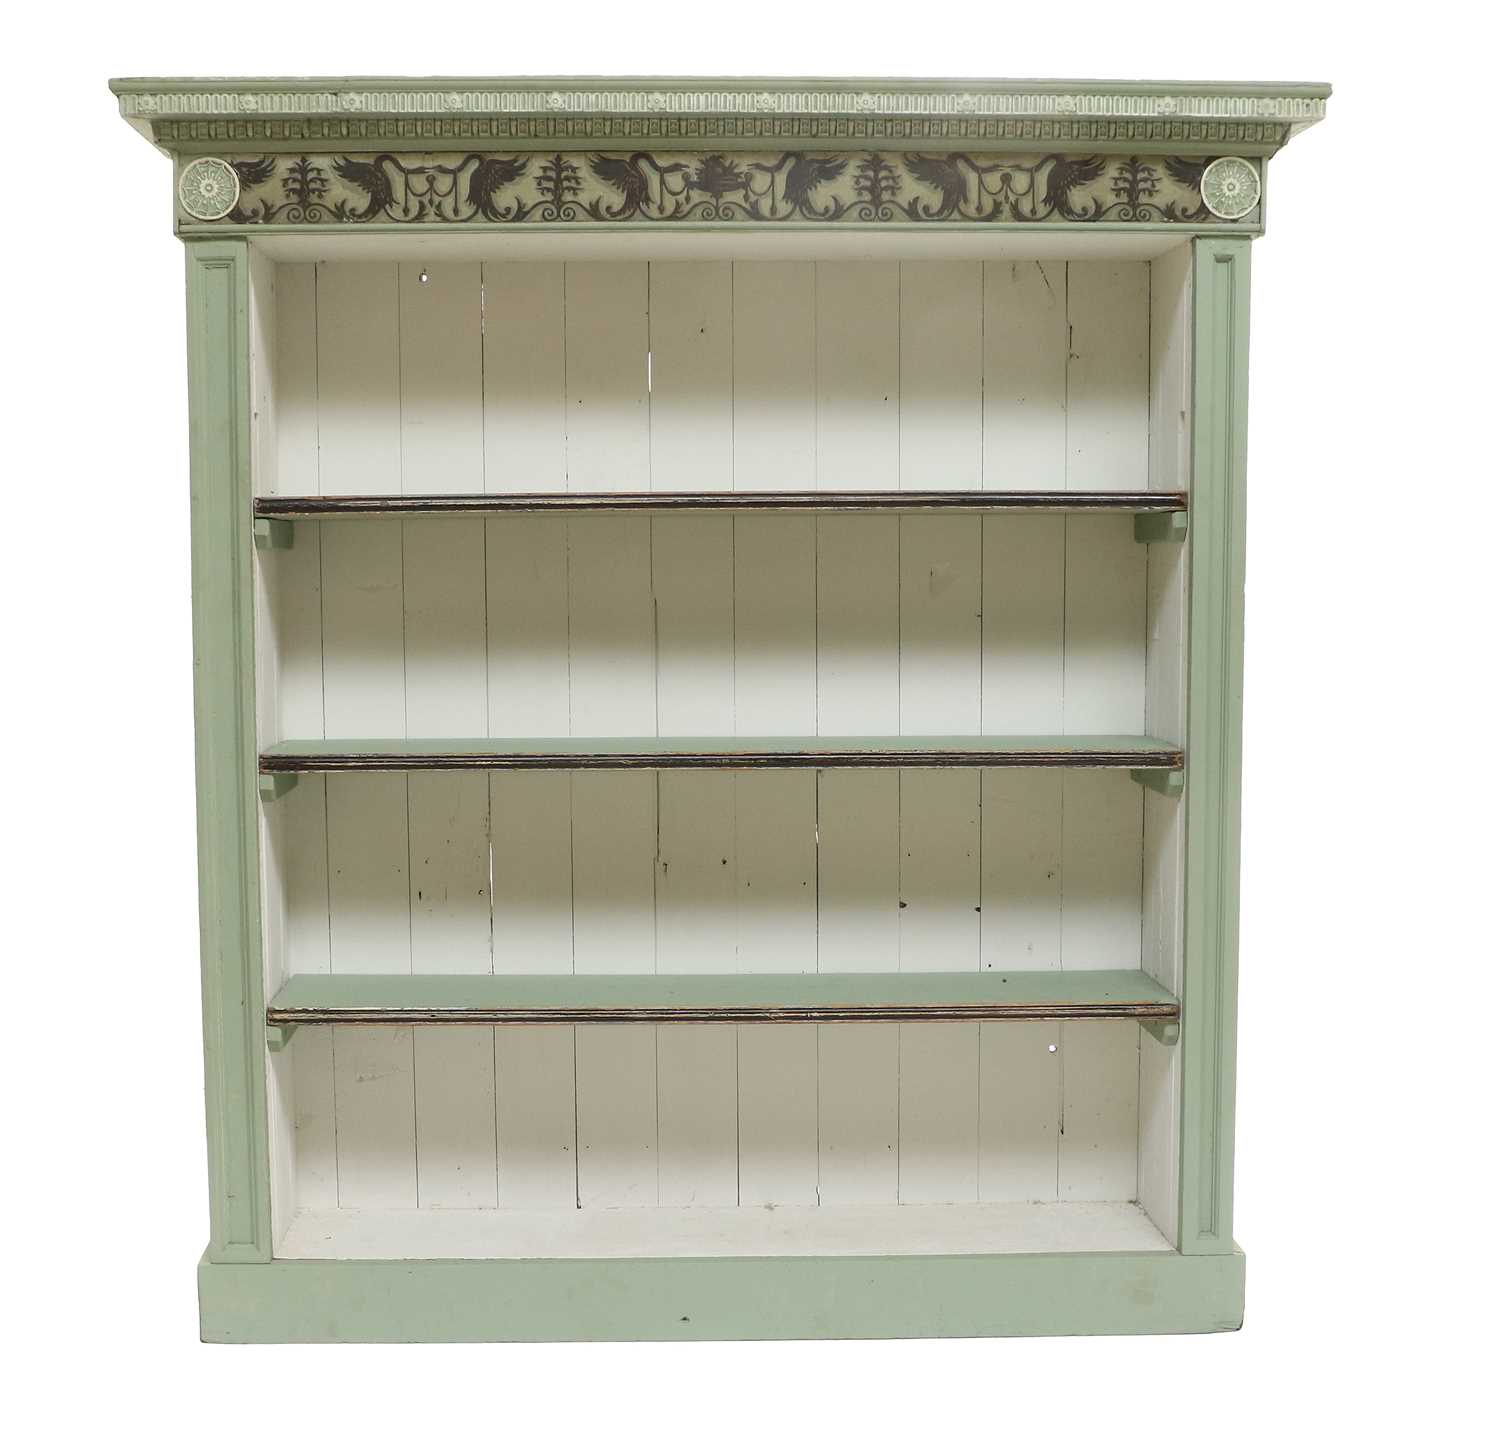 A Victorian Painted Free-Standing Bookcase, in the manner of Robert Adam, late 19th century, the